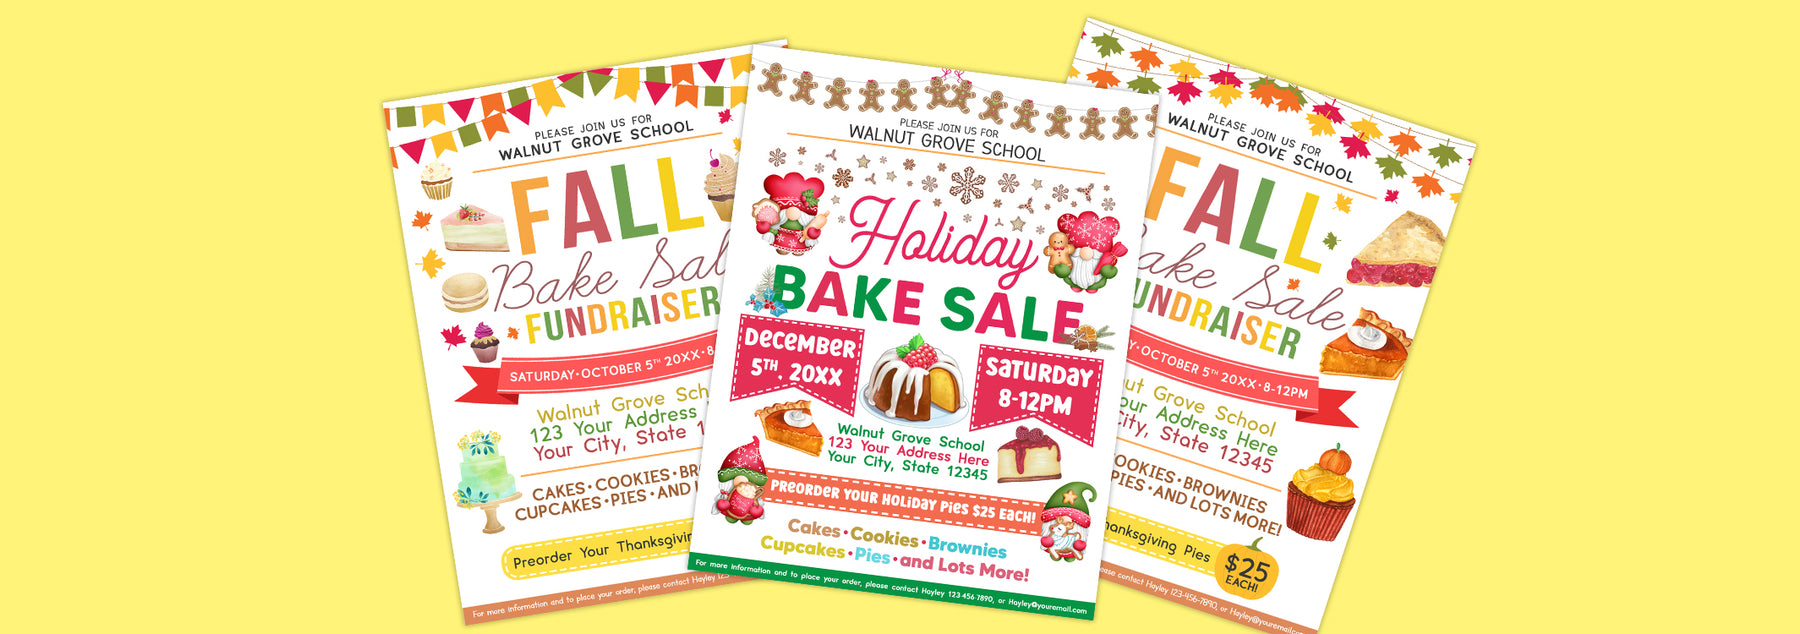 How to Use a Bake Sale Flyer to Raise Money for Charity